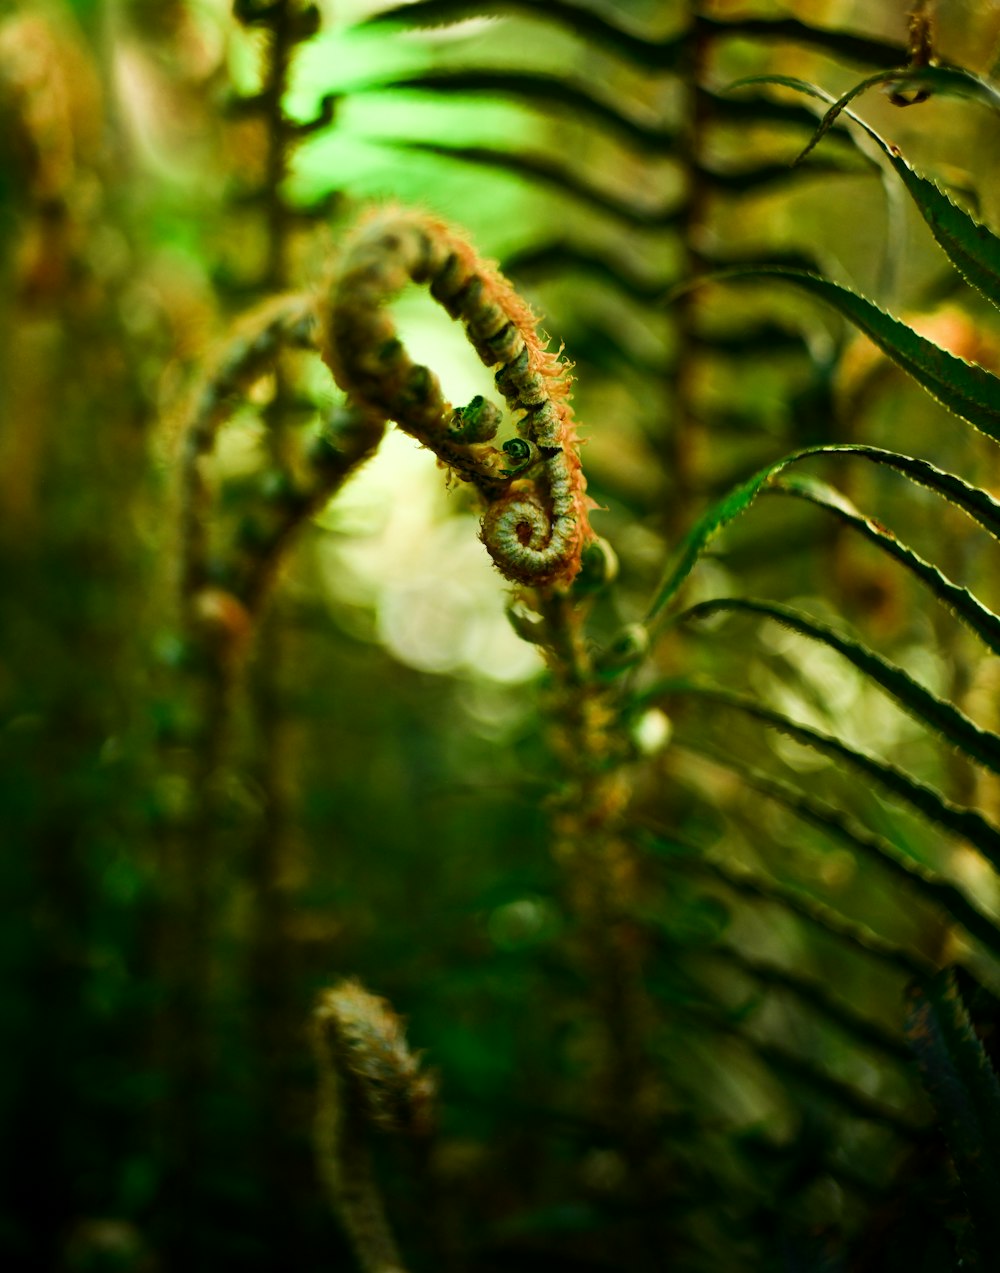 a close up of a fern in a forest